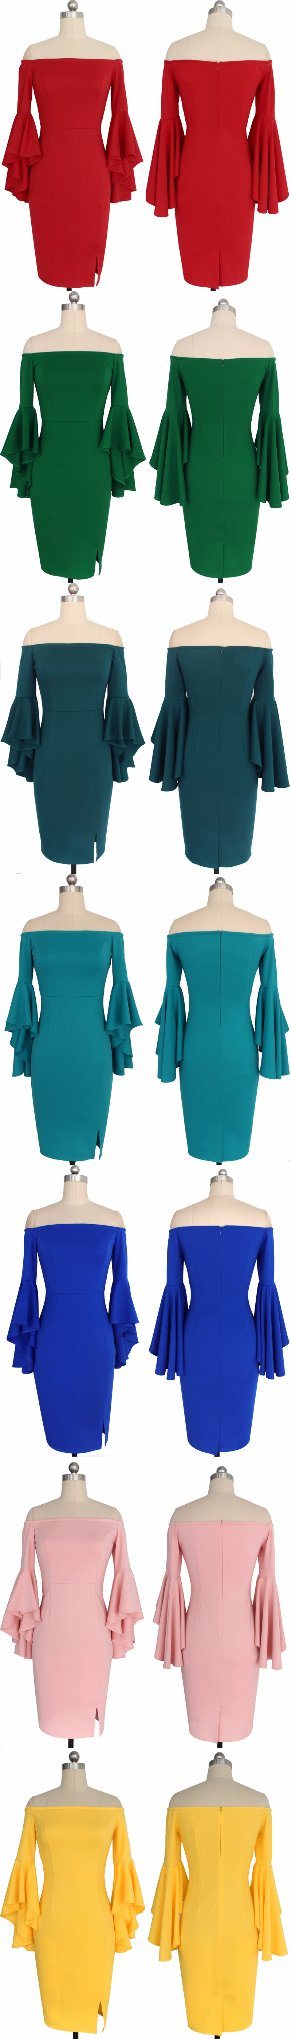 Woman Trumpet Sleeve Office Dress Sexy Fashion Slim Casual Club Party Dress